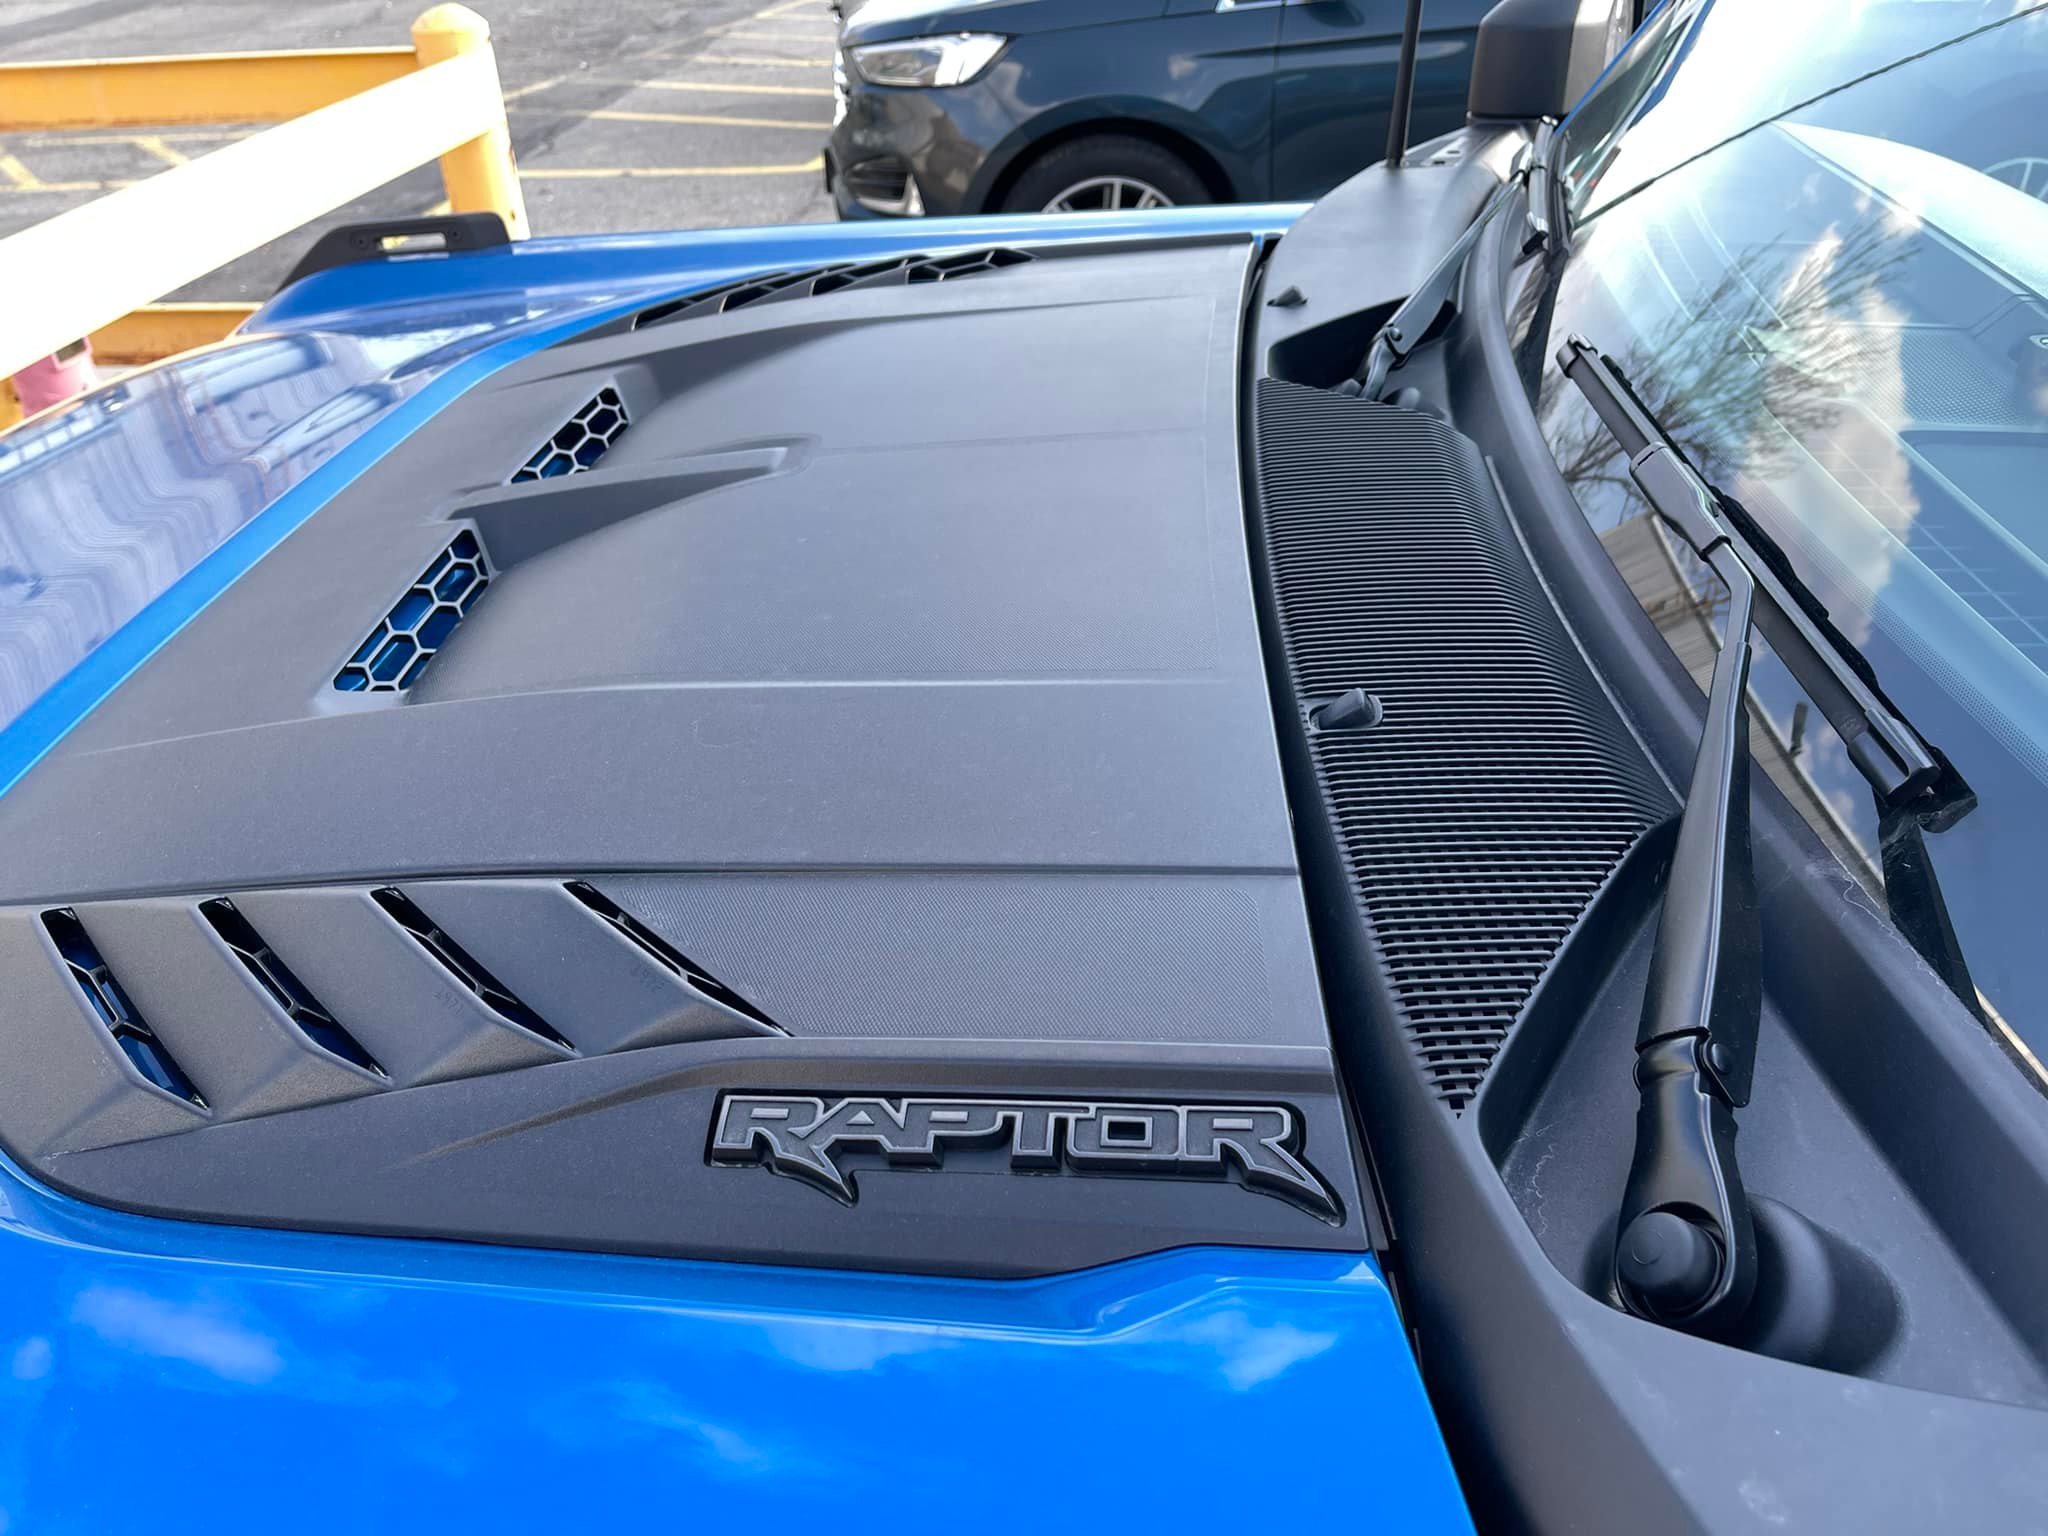 Ford Bronco Velocity Blue Raptor Bronco With MGV Interior Pics and Fly-By Video Sound Clip Velocity Blue Bronco Raptor with interior photos and engine exhaust video sound 3